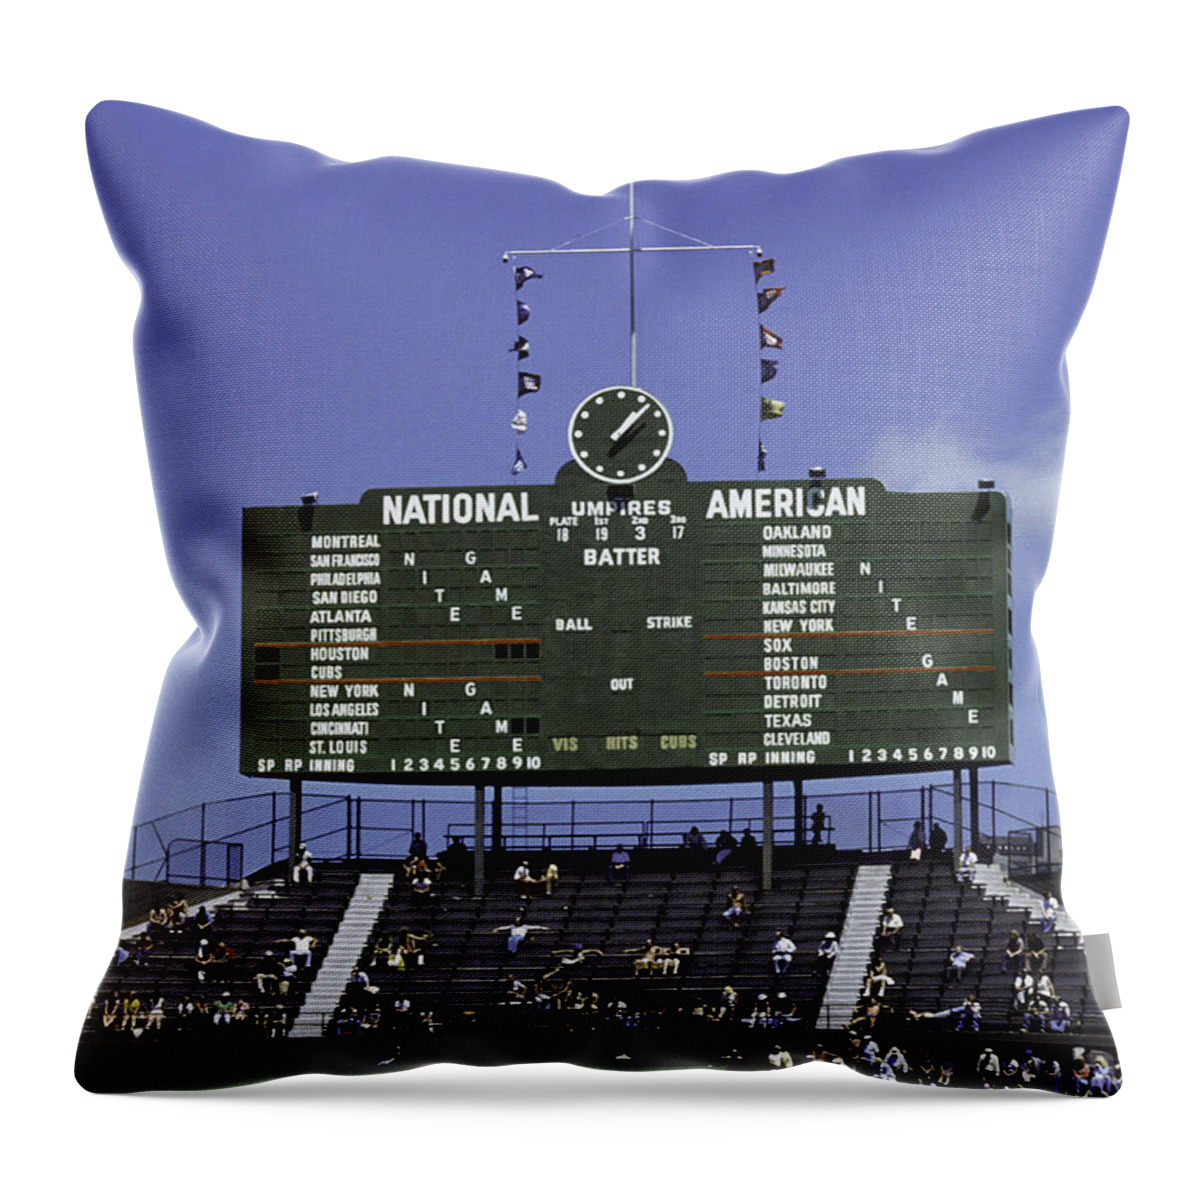 Baseball Throw Pillow featuring the photograph Wrigley Field Classic Scoreboard 1977 by Paul Plaine